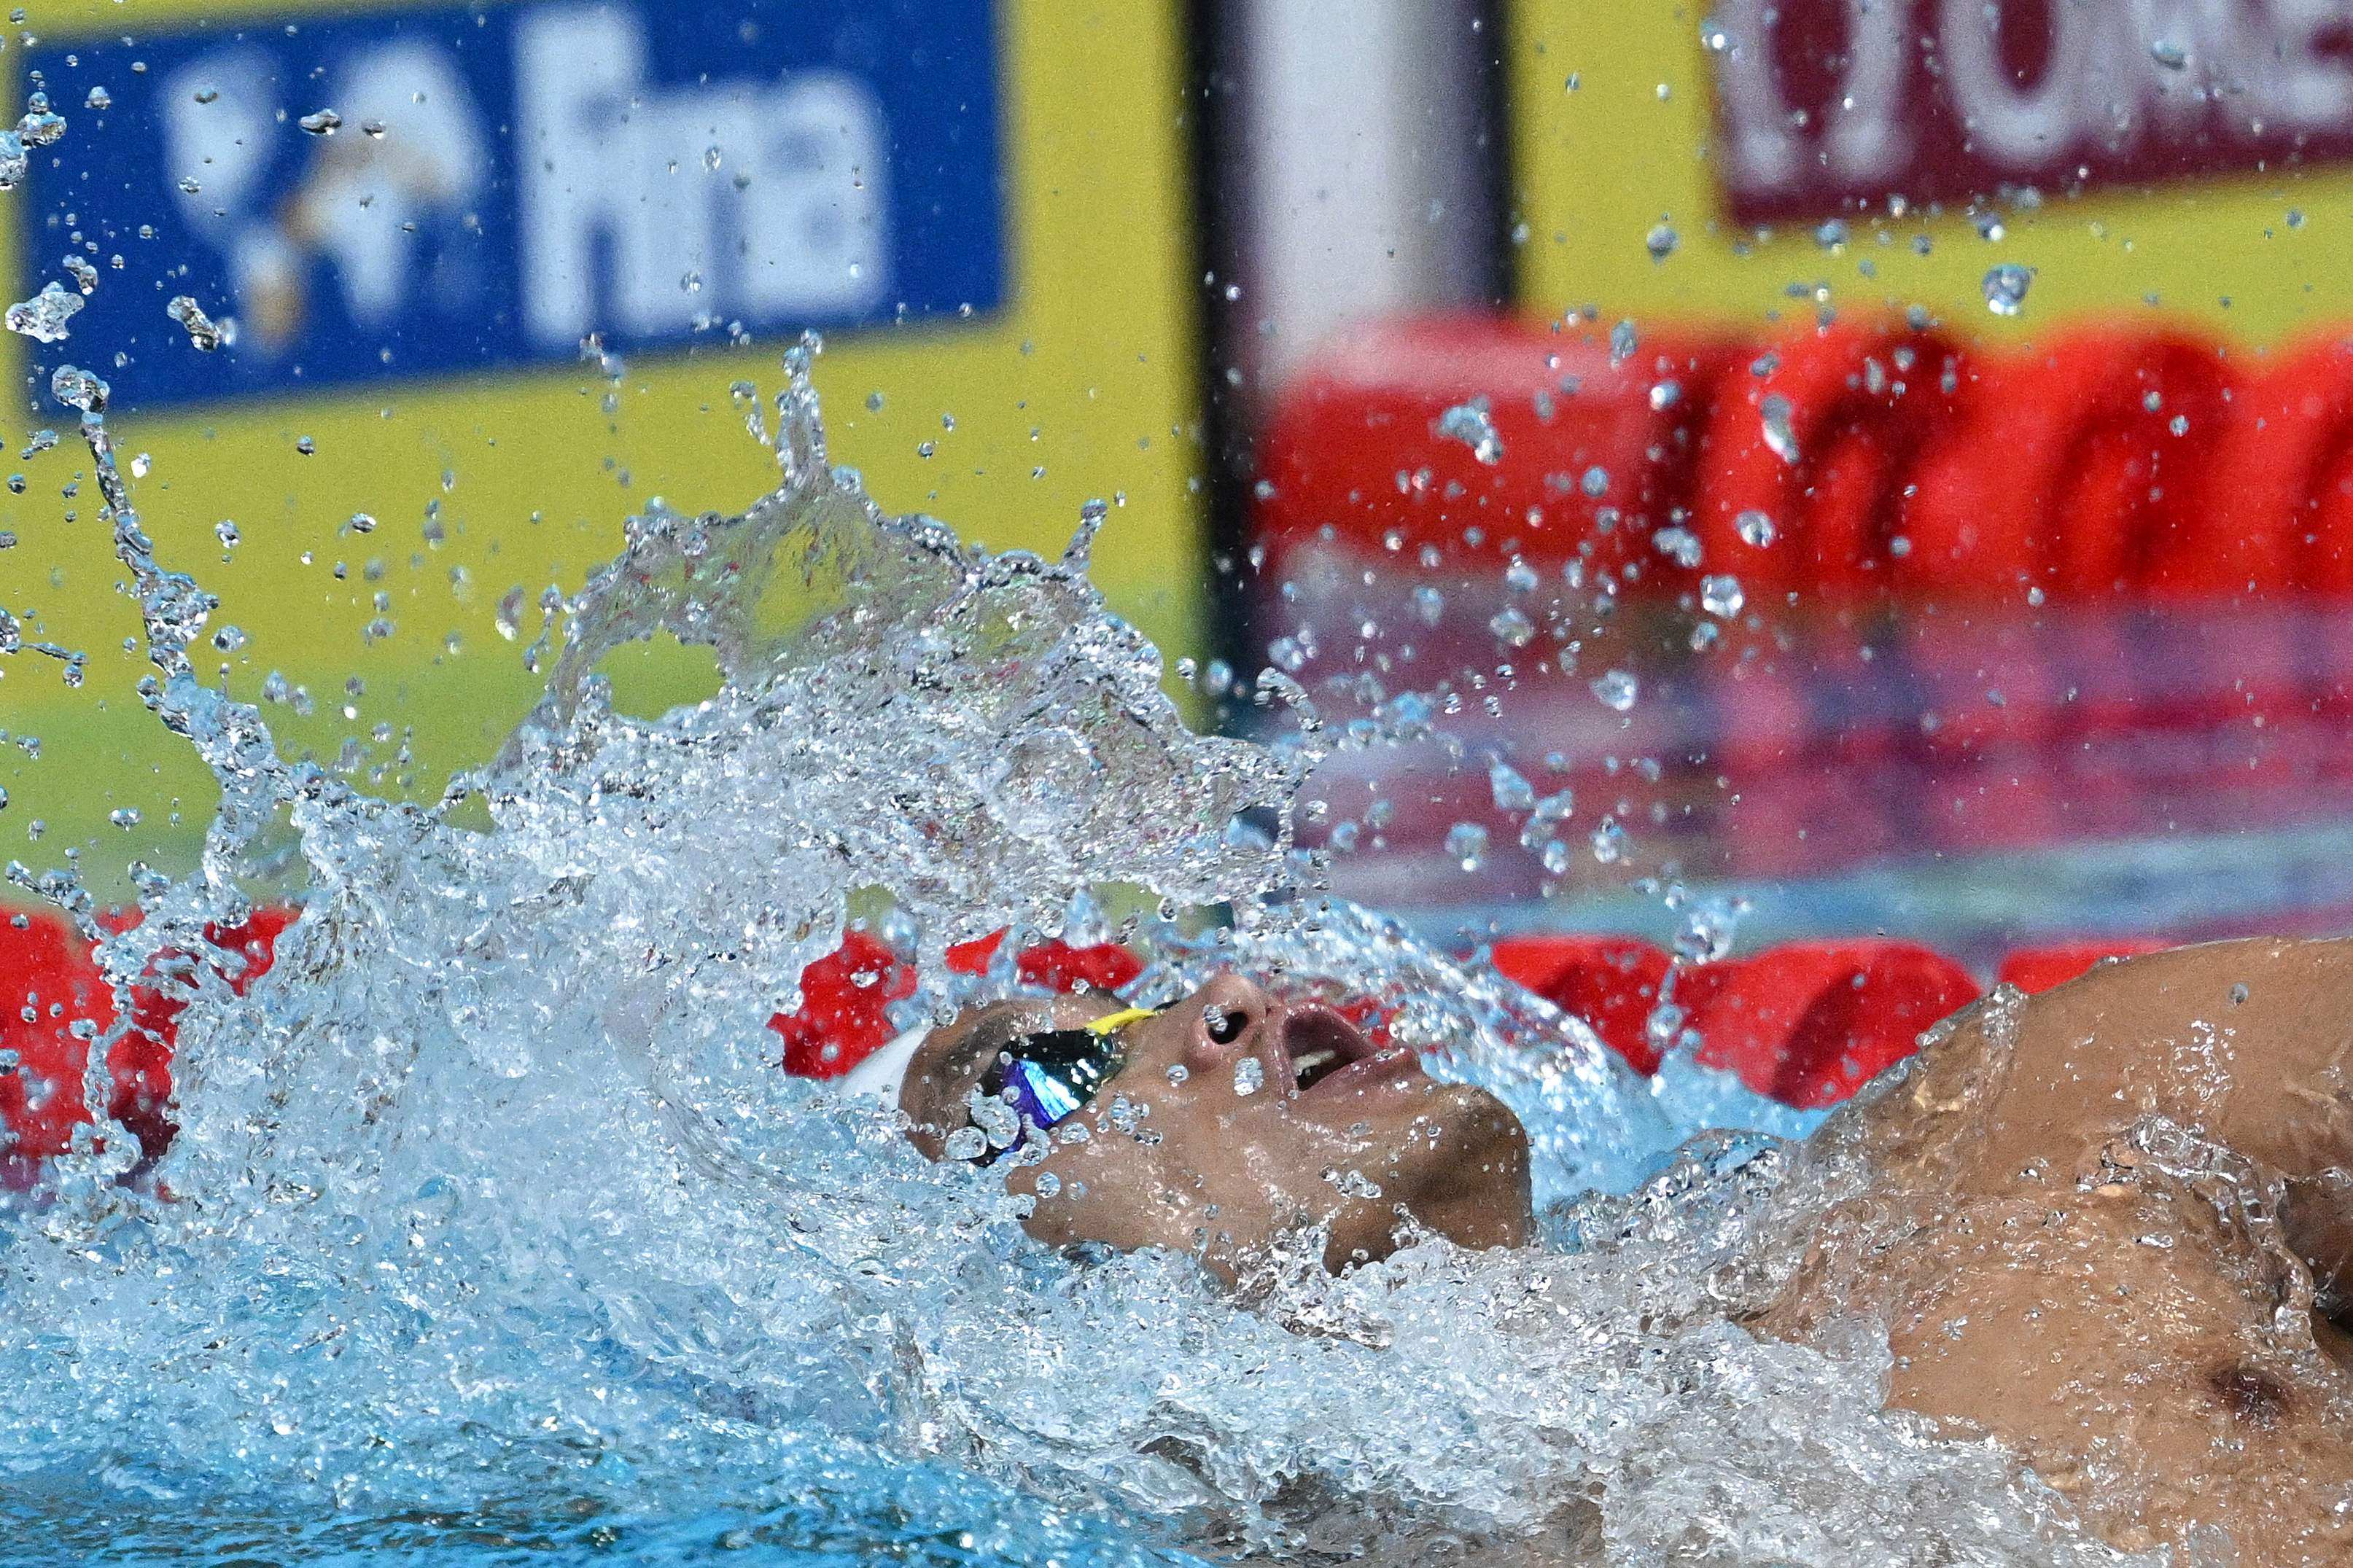 Hong Kong’s Lau Shiu-yue competes in a heat for the men’s 100m backstroke event during the Budapest 2022 World Aquatics Championships at Duna Arena. Photo: AFP